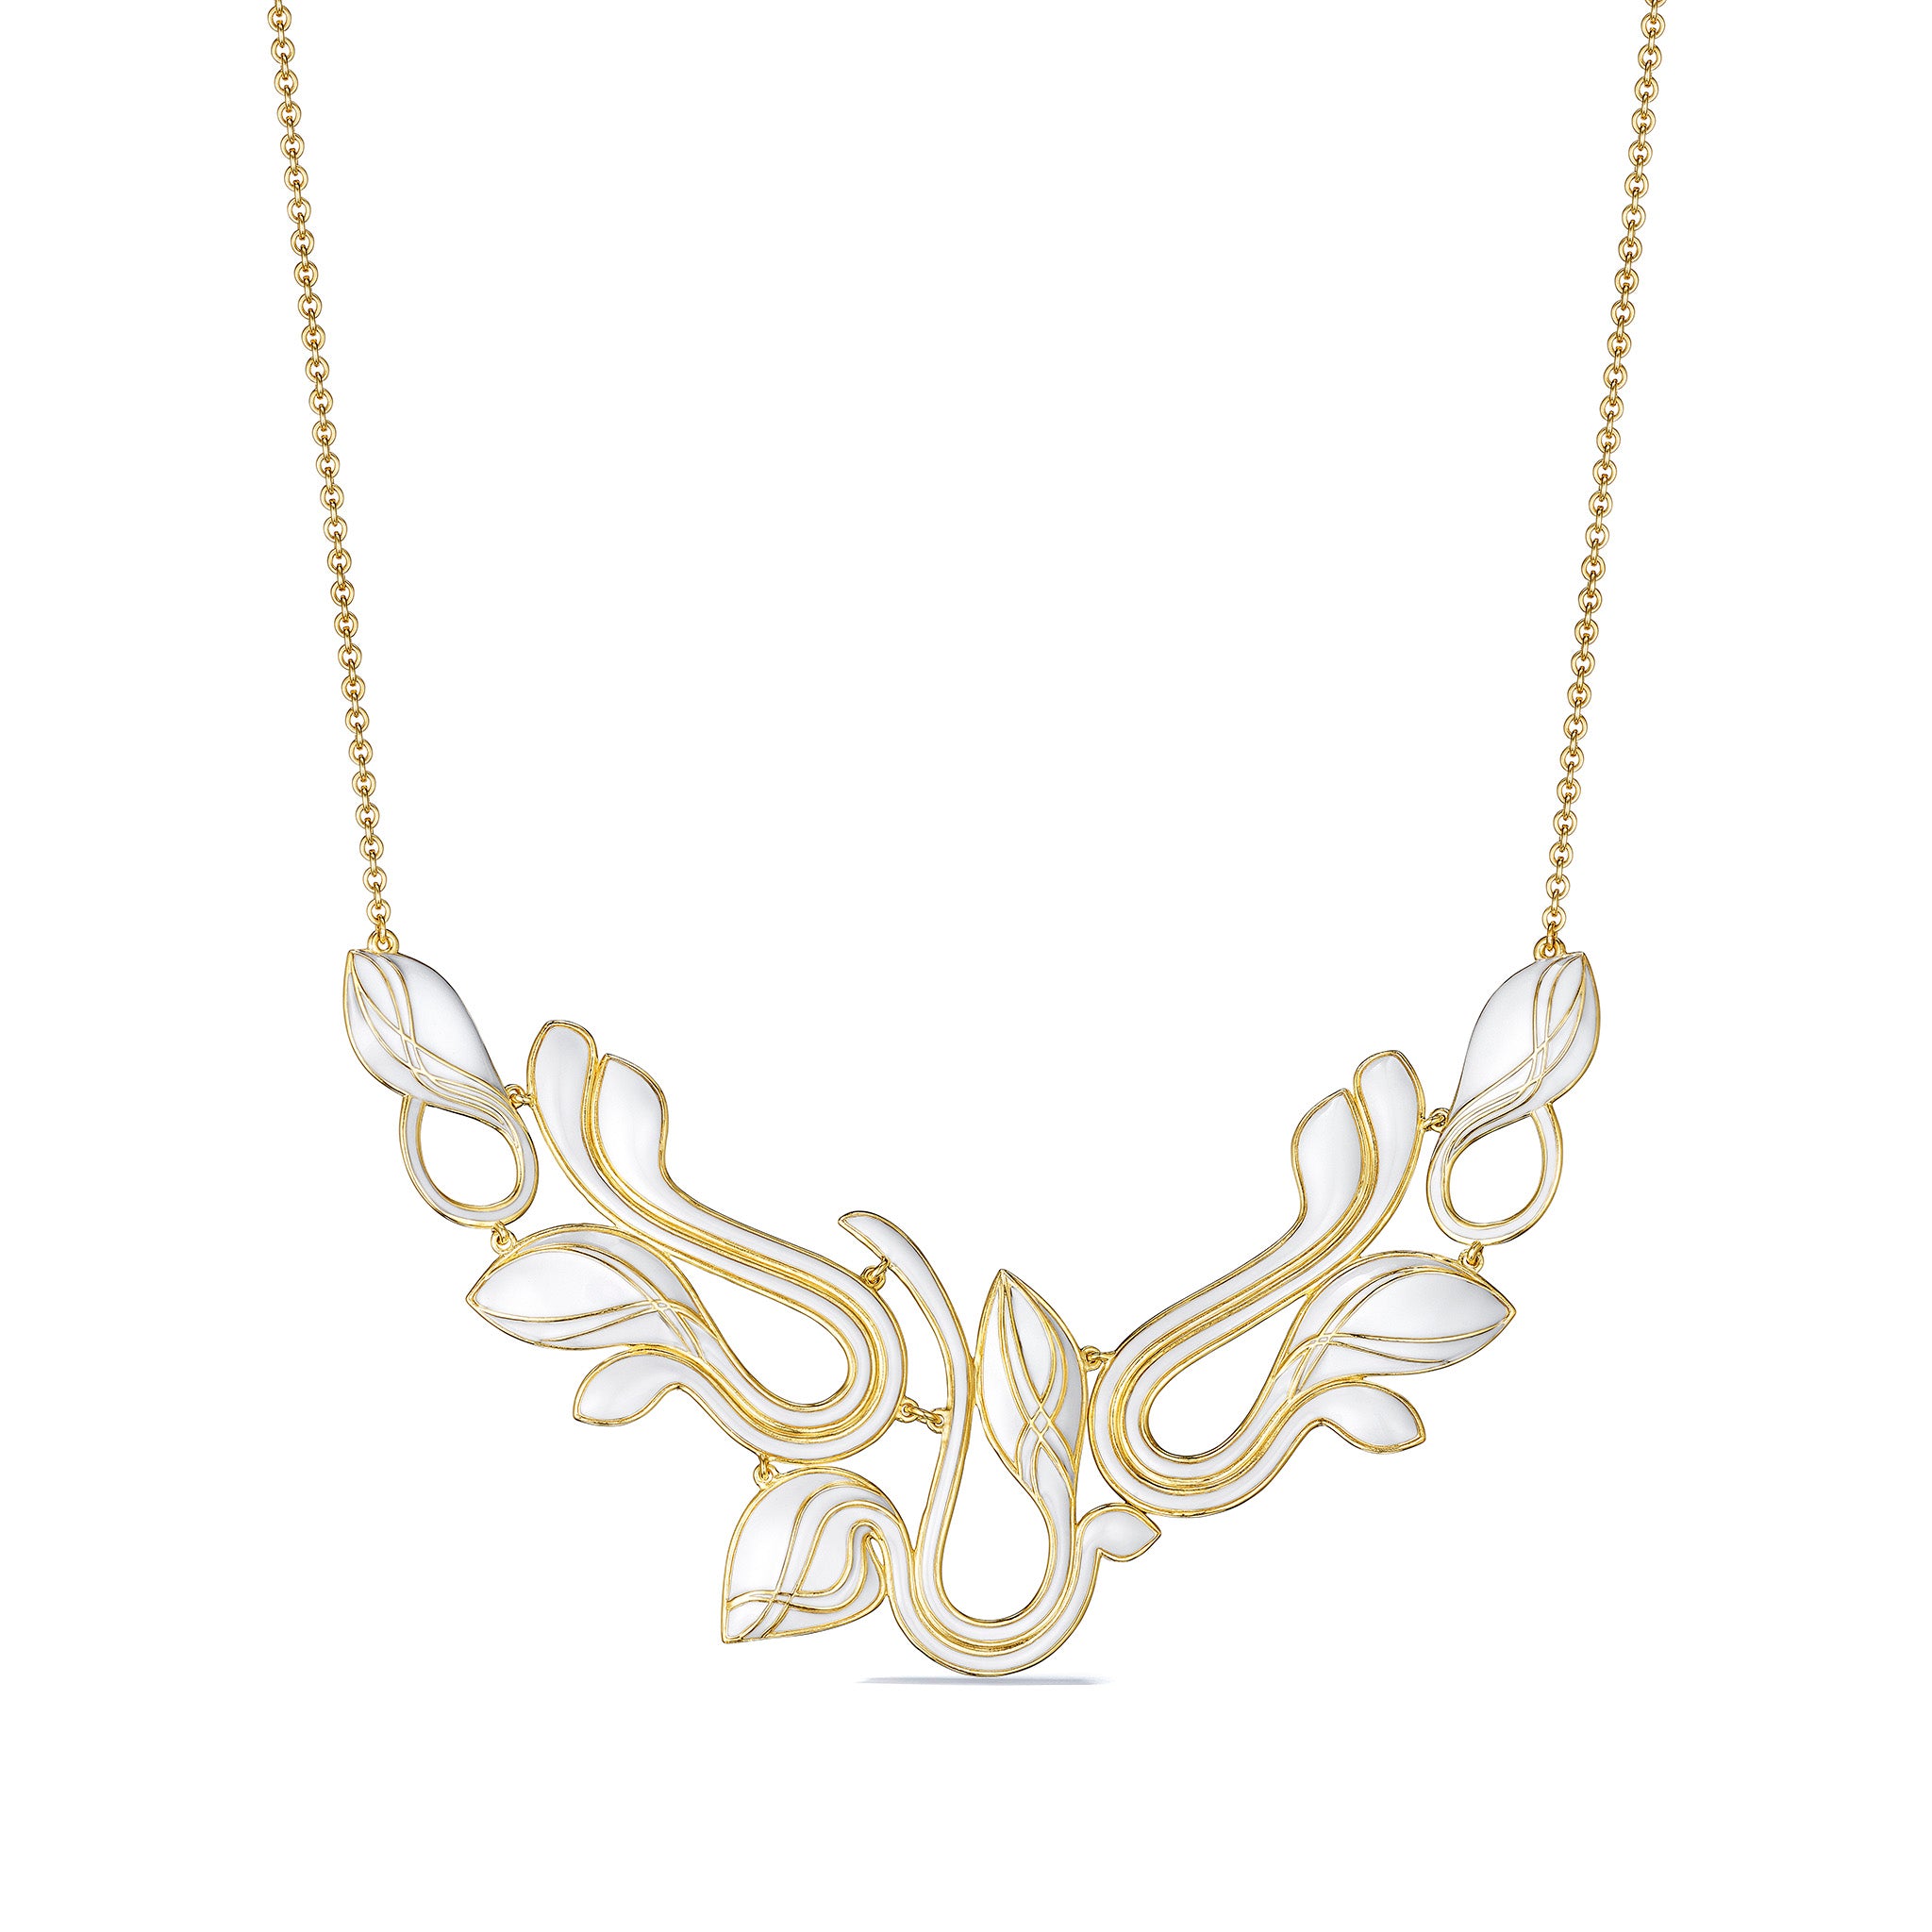 Adoro Necklace in 18K Gold Vermeil